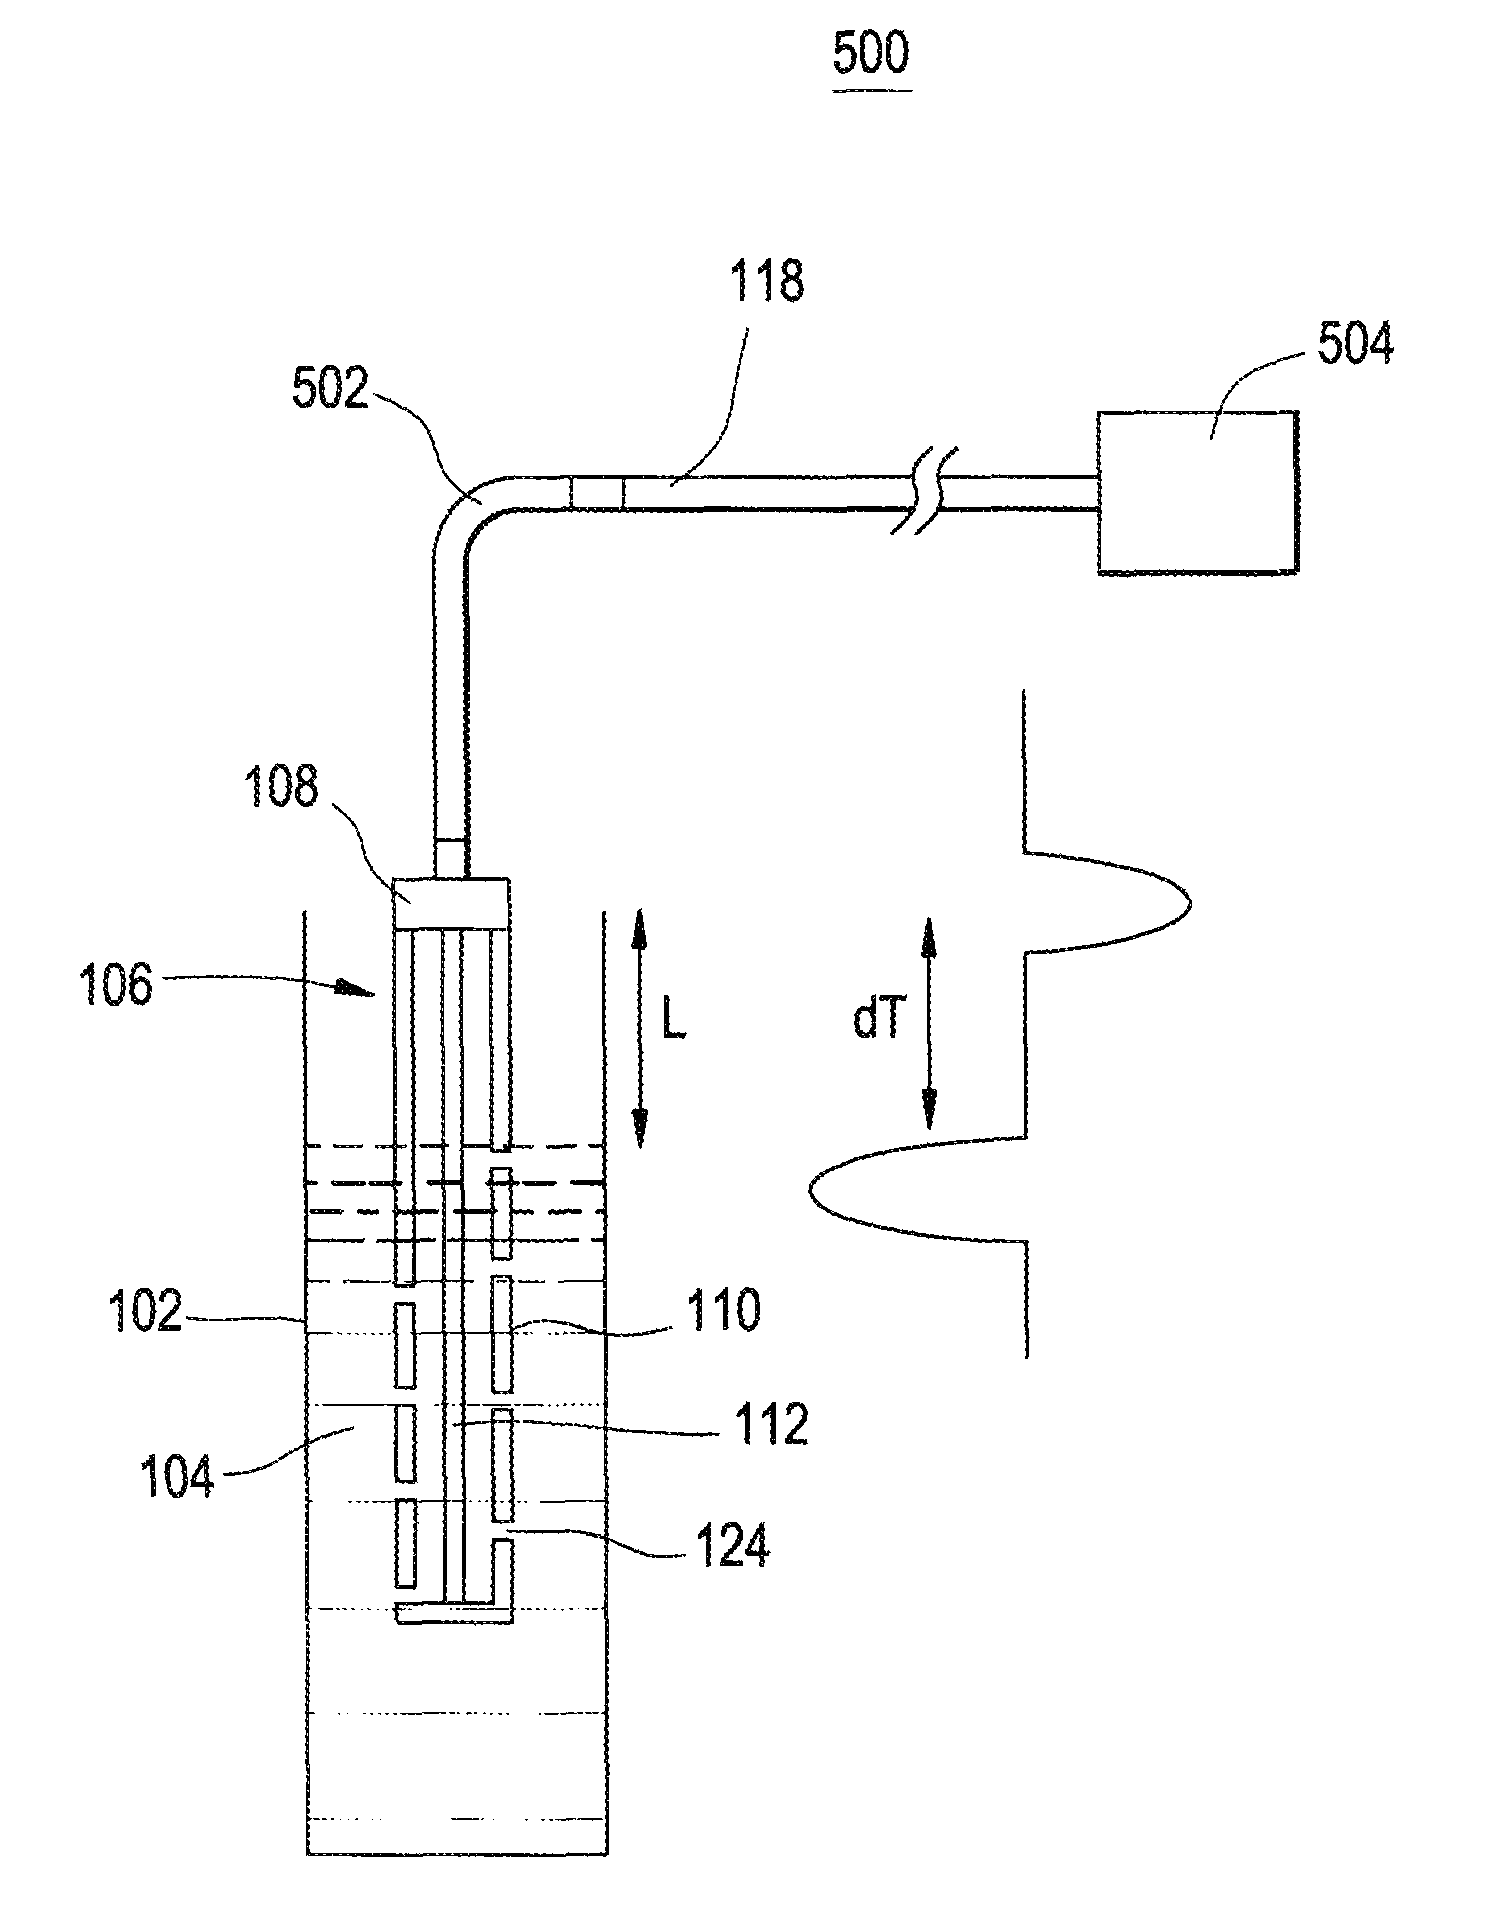 Systems and methods for remotely measuring a liquid level using time-domain reflectometry (TDR)